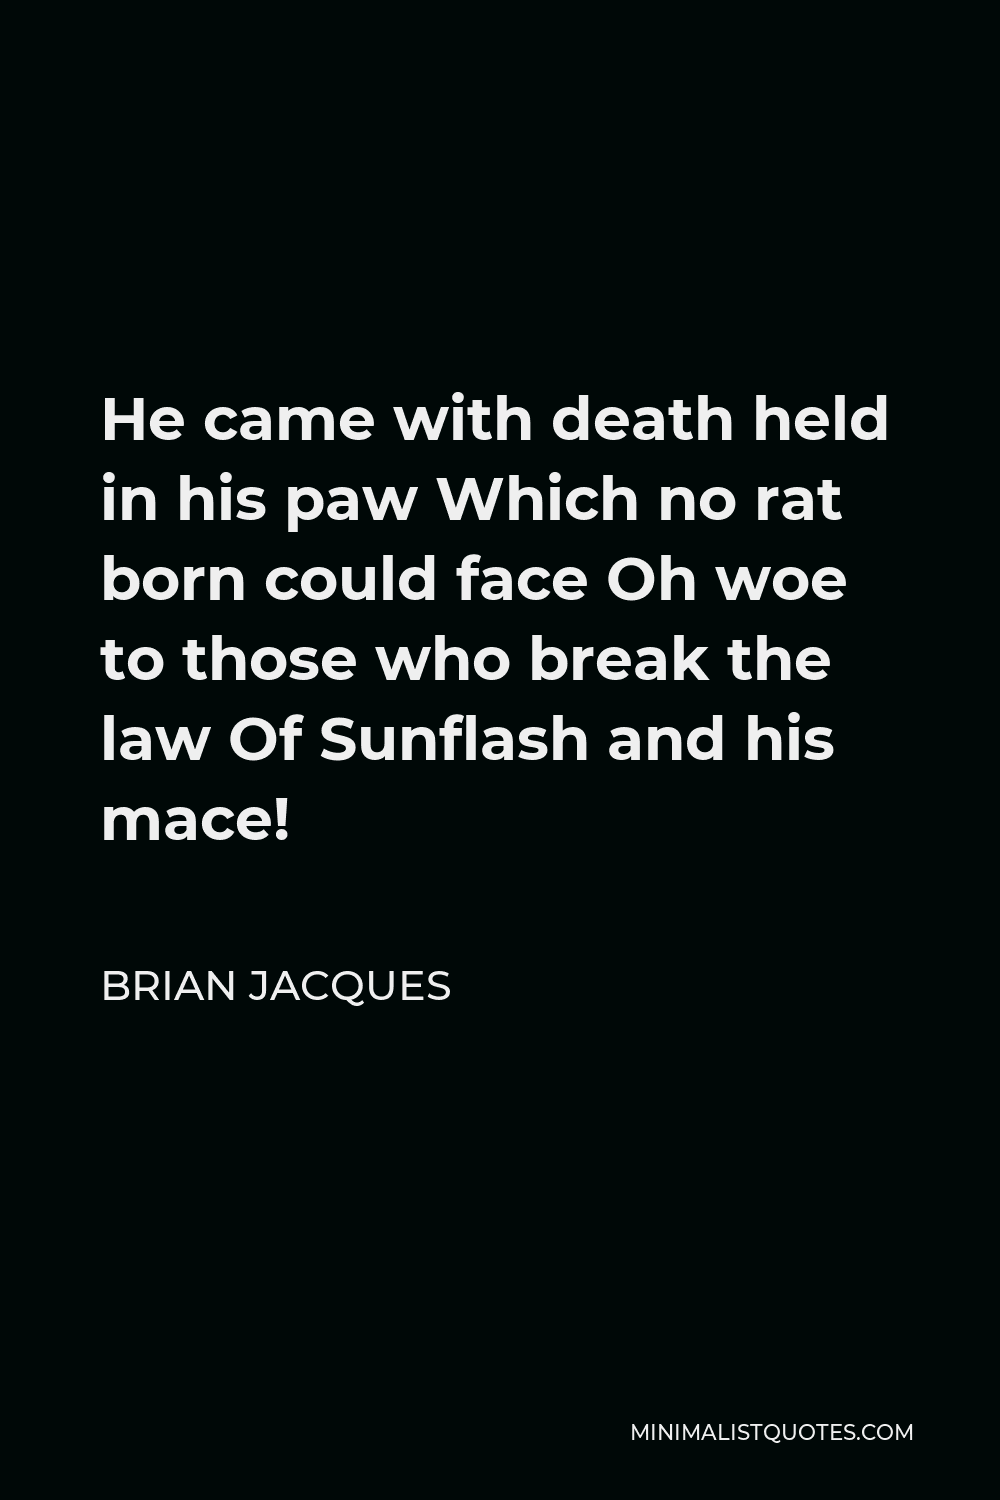 Brian Jacques Quote - He came with death held in his paw Which no rat born could face Oh woe to those who break the law Of Sunflash and his mace!